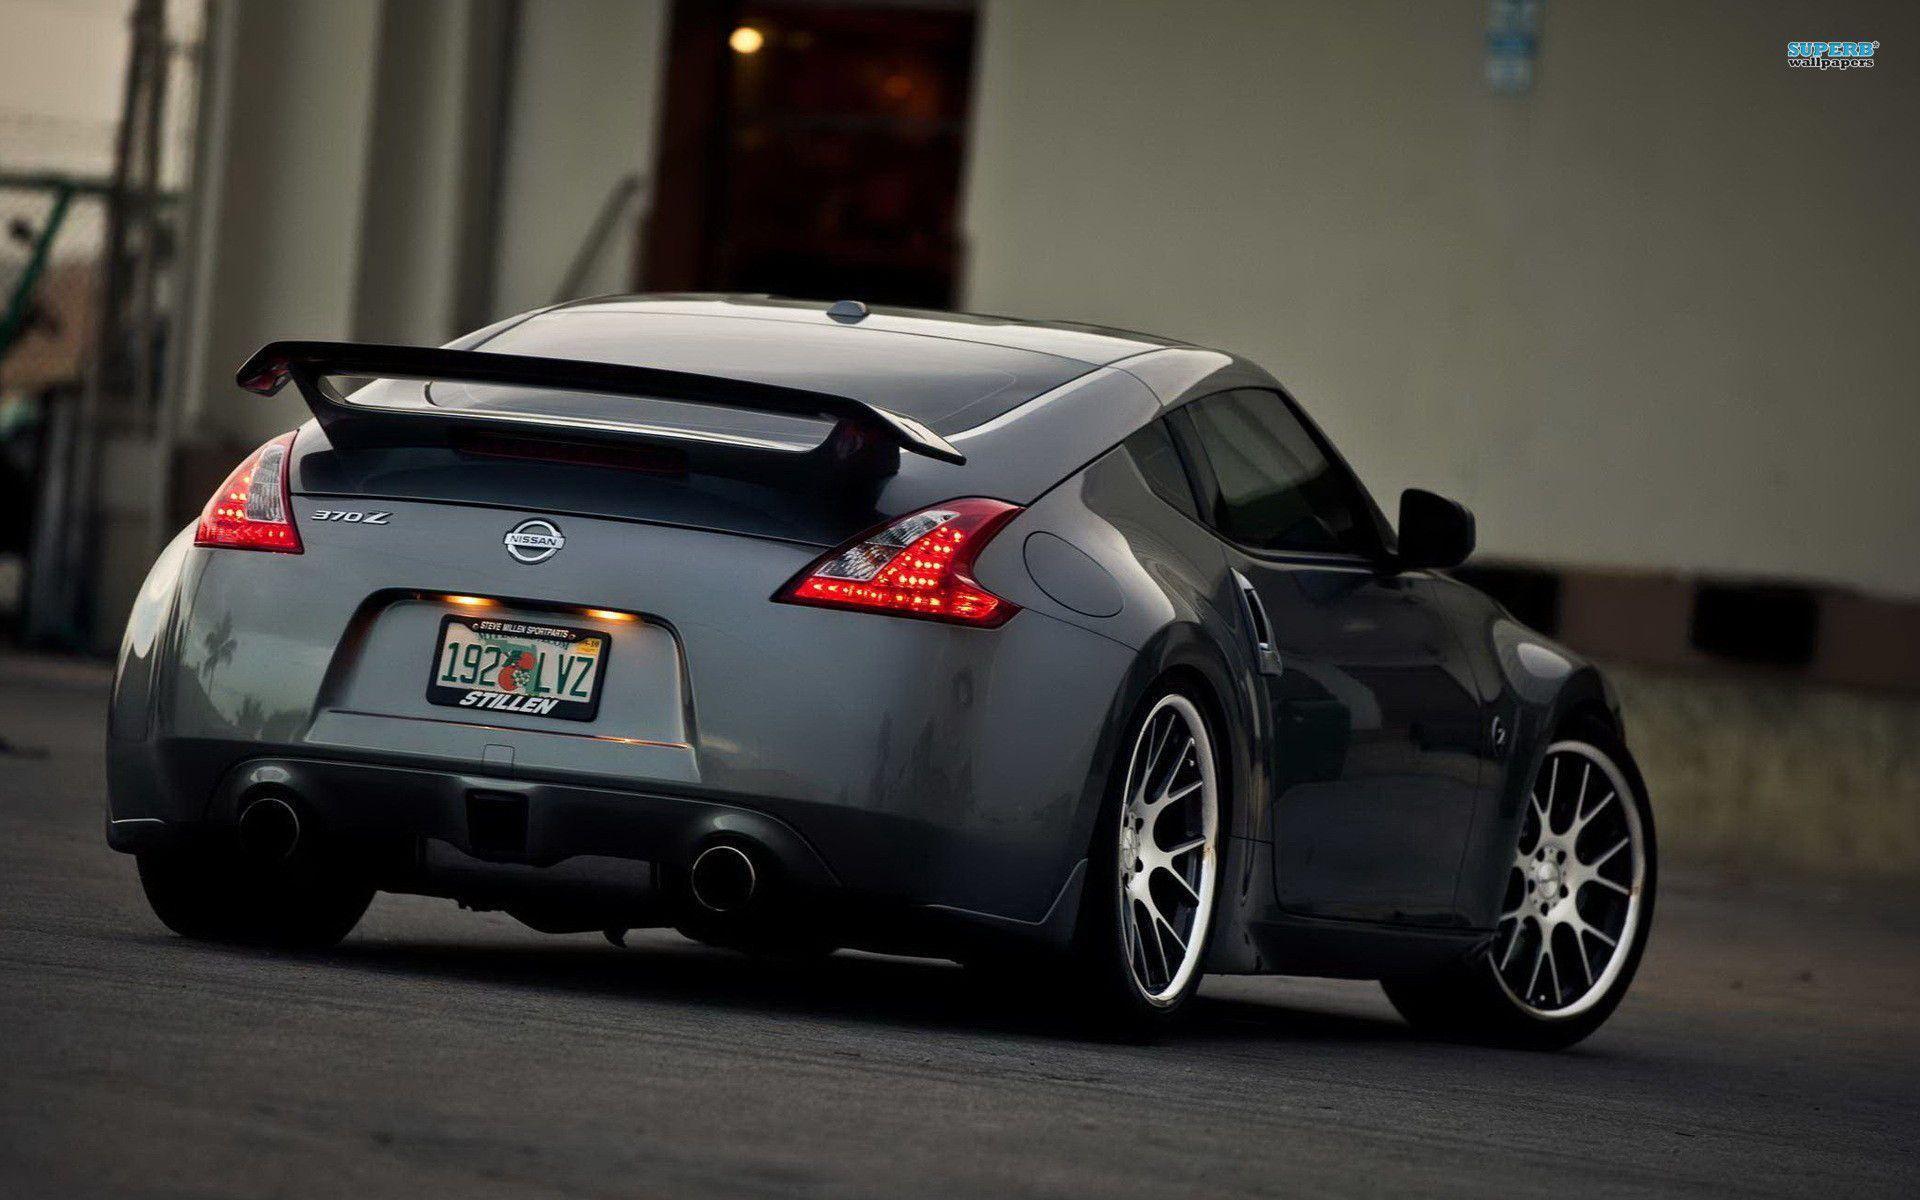 Nissan 370z Wallpapers Wallpaper Cave Images, Photos, Reviews